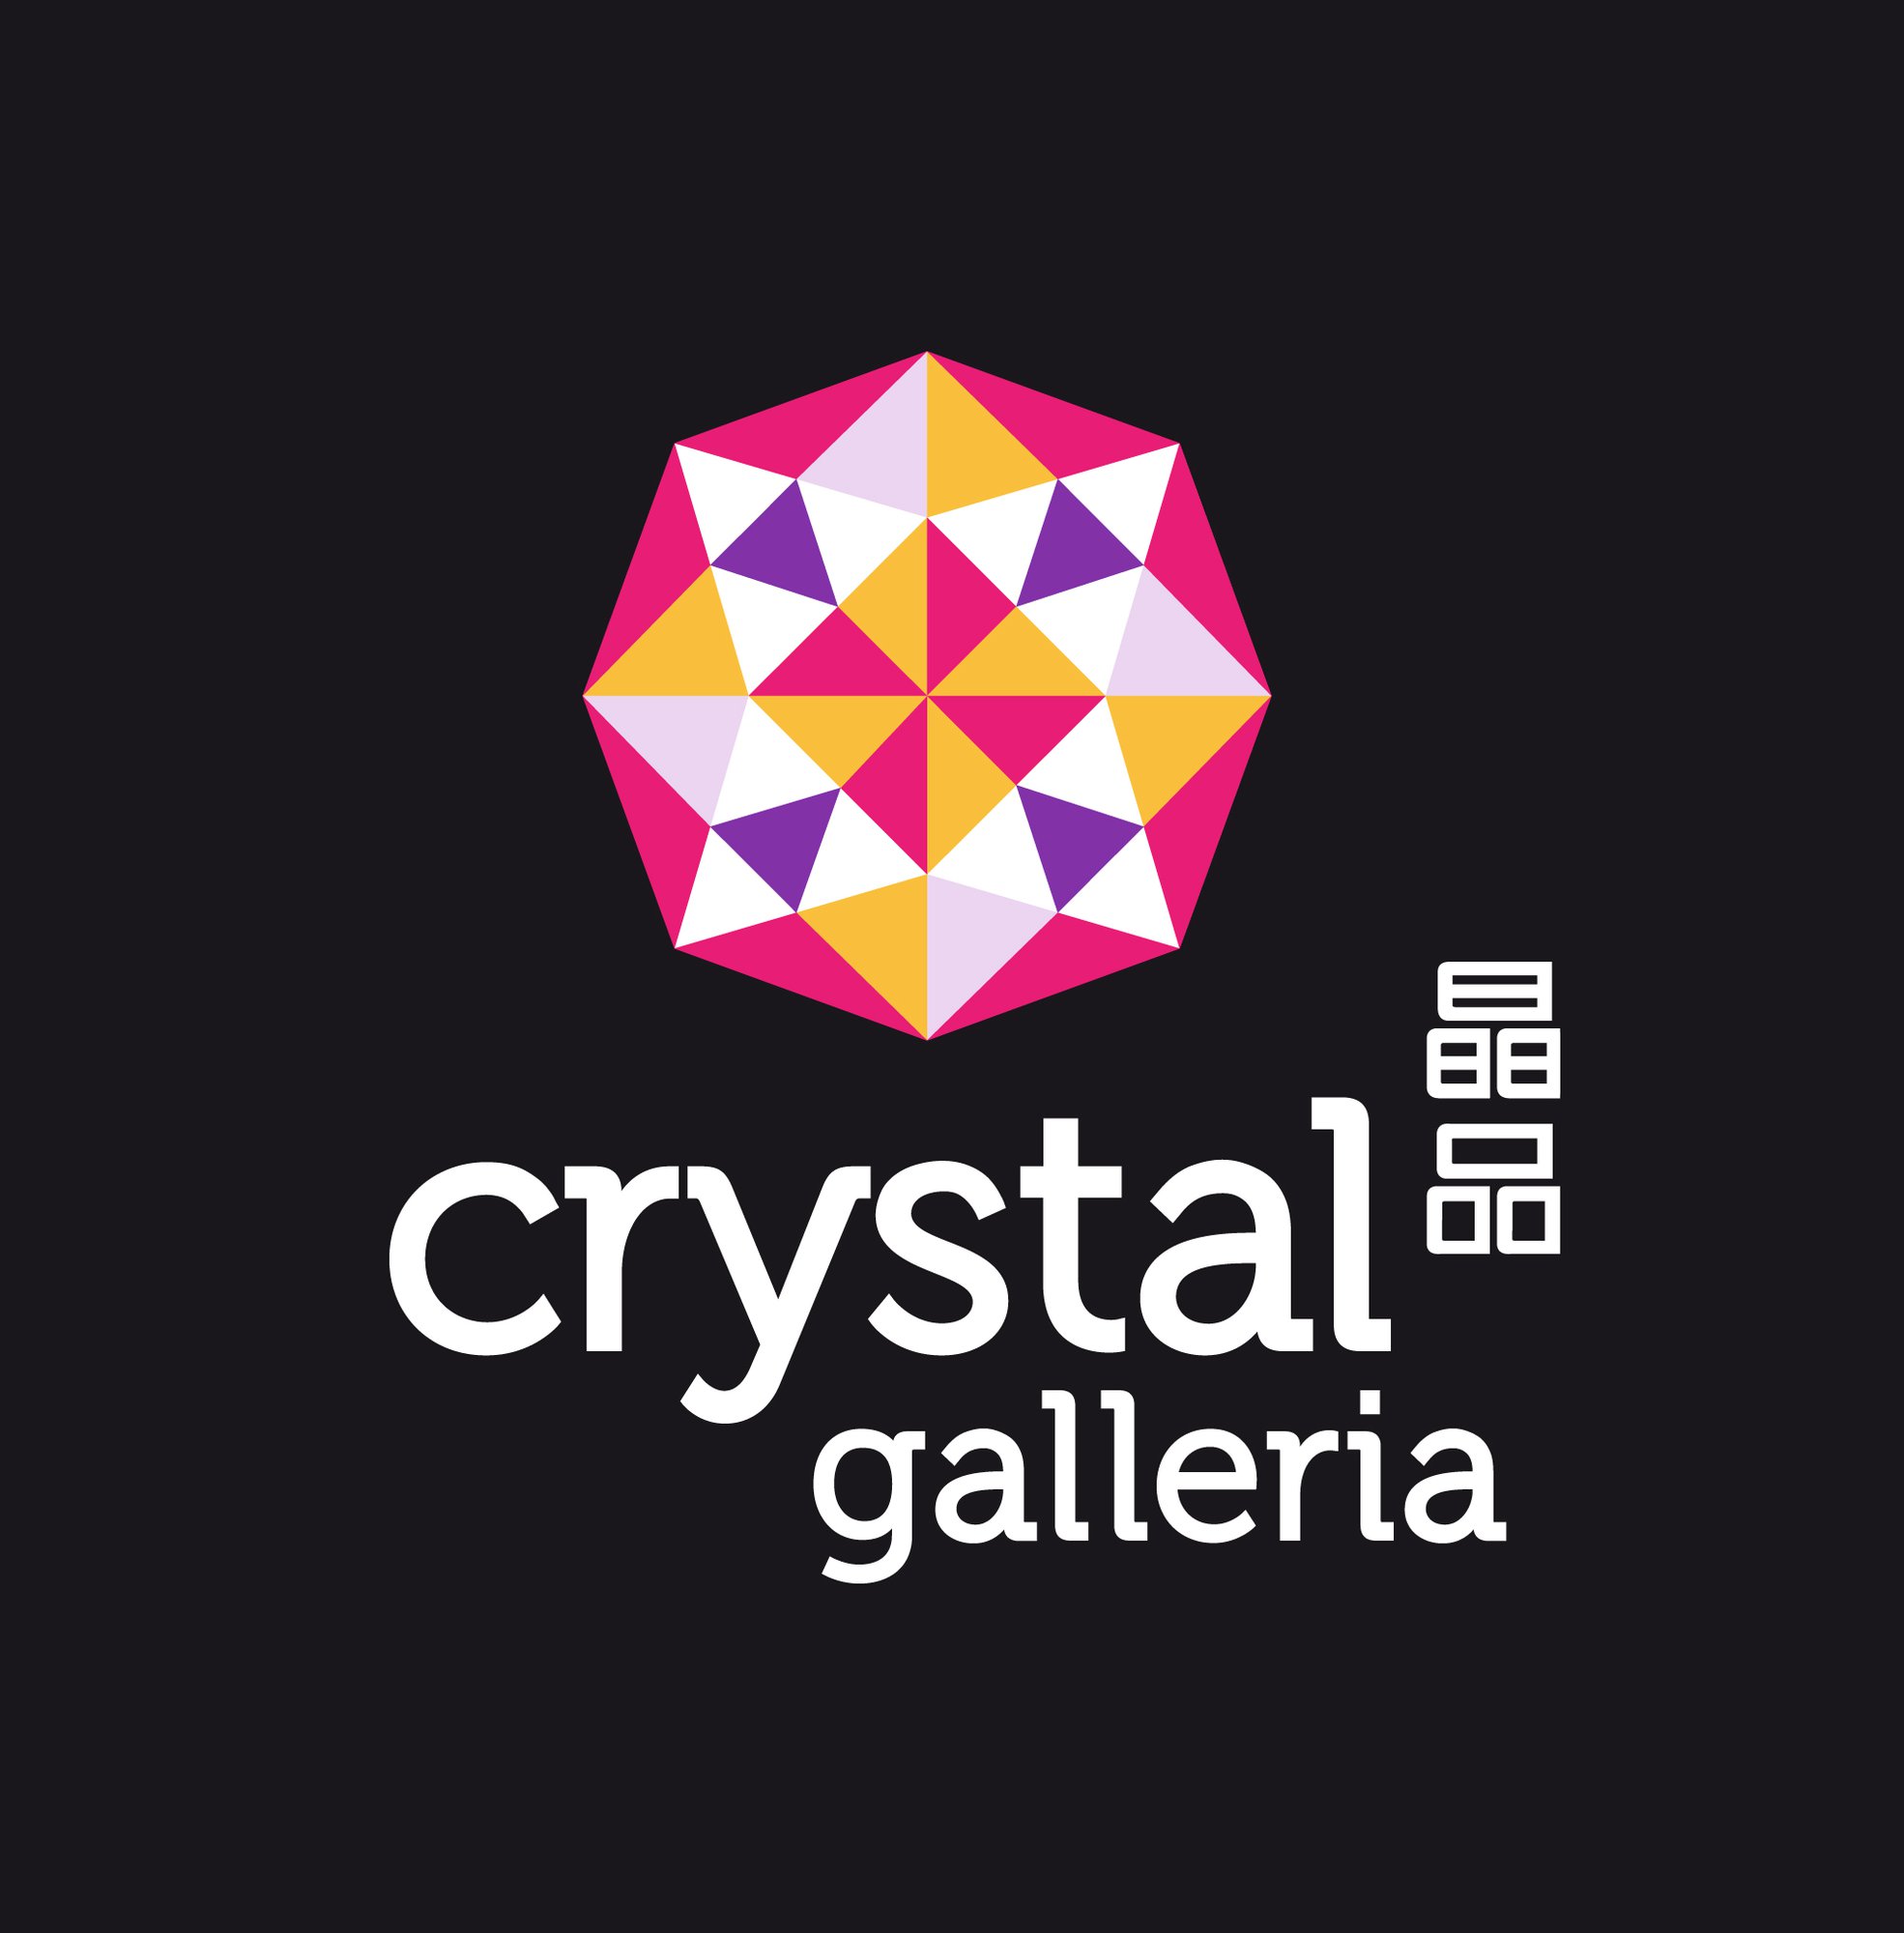 Image of Crystal Galleria